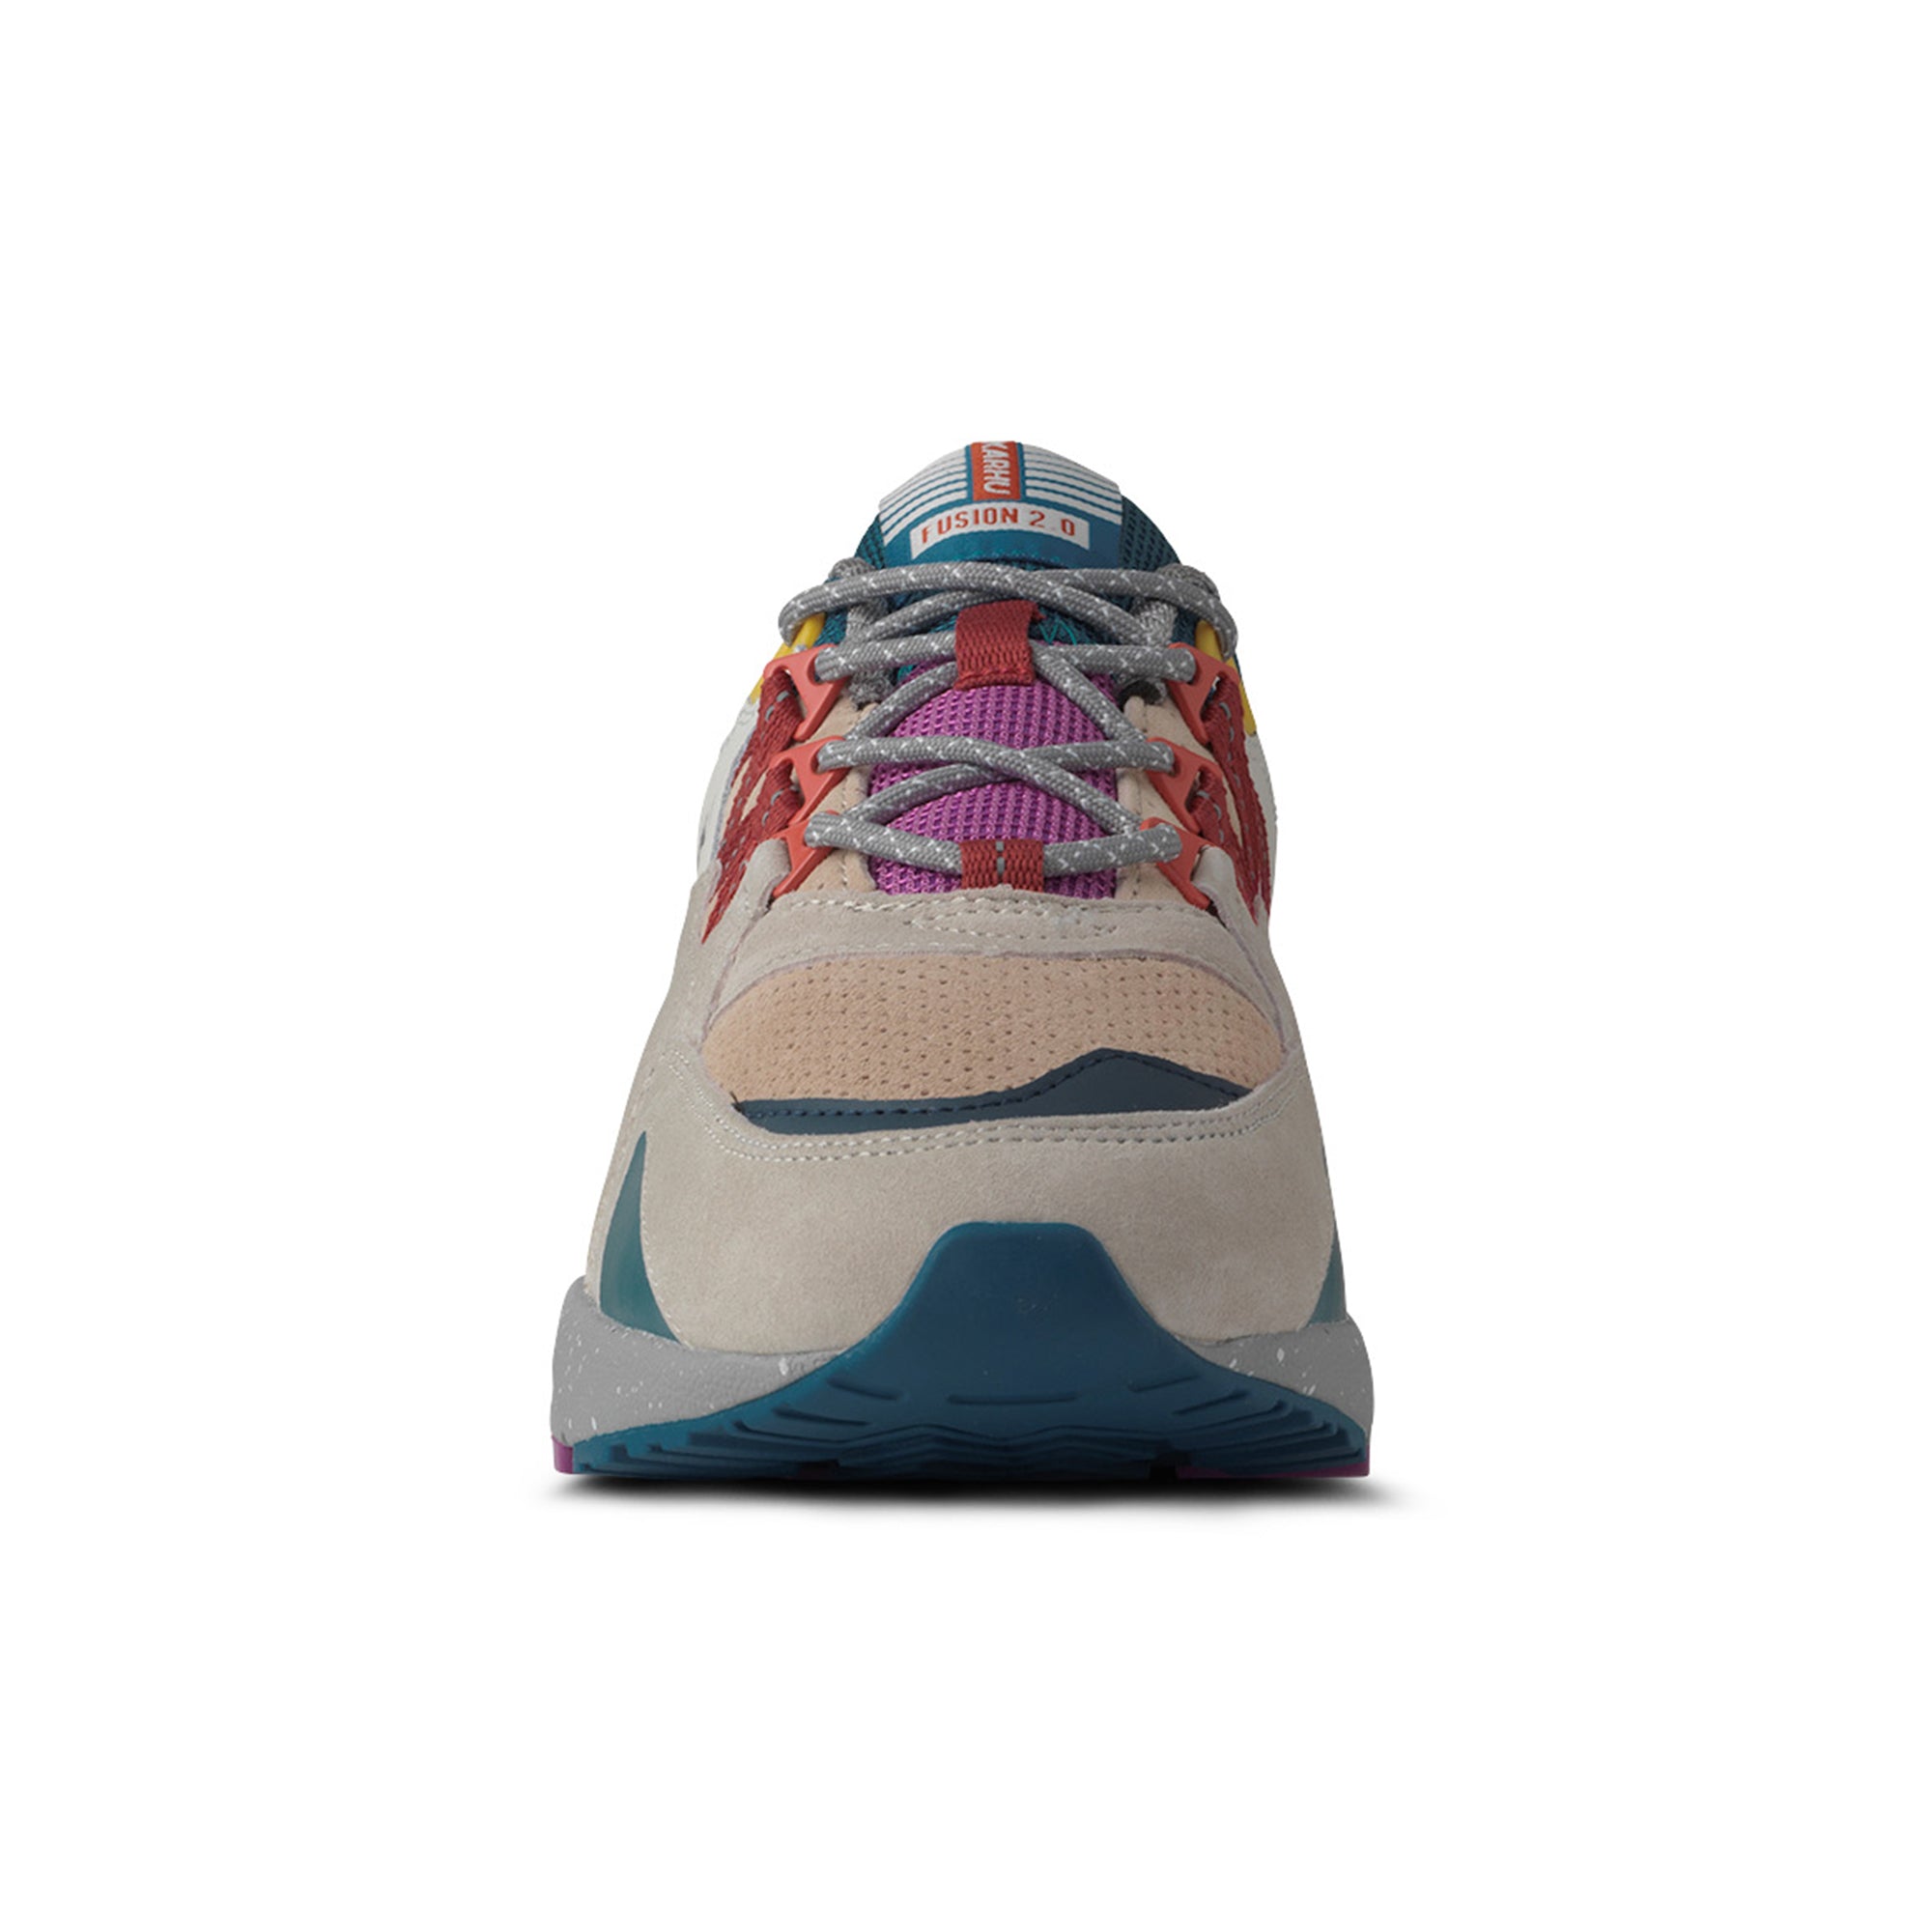 Karhu Fusion 2.0 Trainers - Silver Lining / Mineral Red